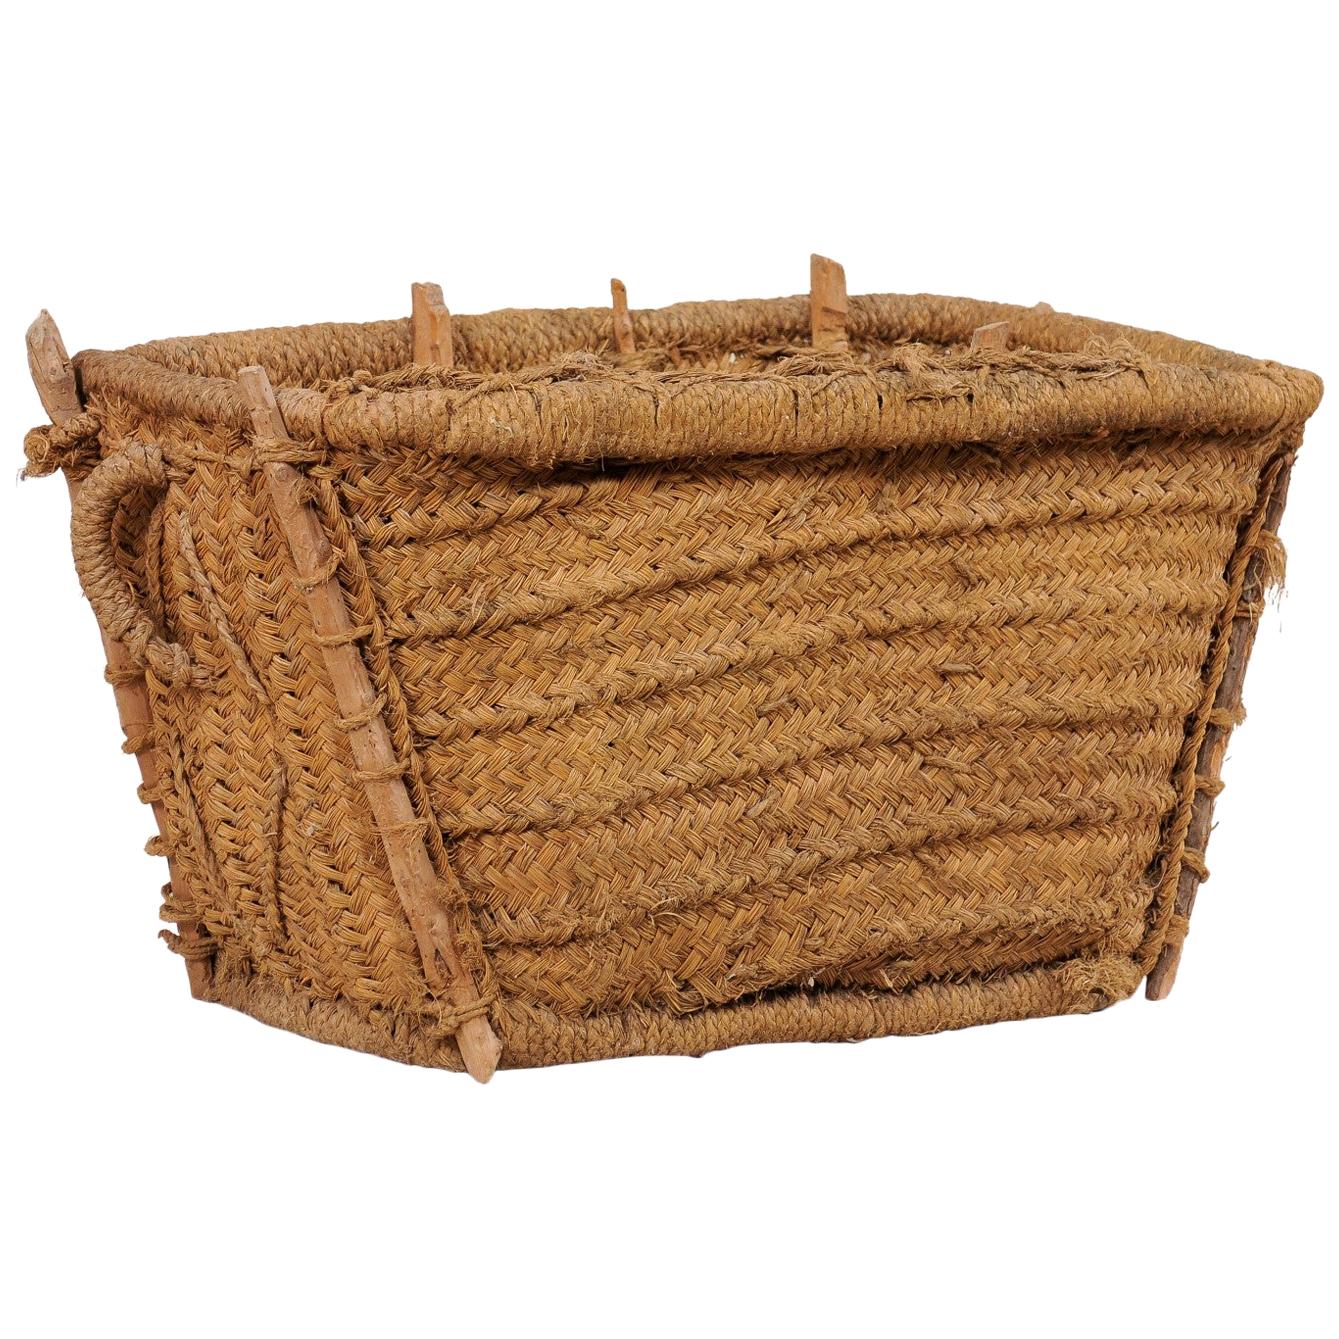 Spanish Handwoven Basket with Lid, Trapezoidal Shaped Body and Natural Fibers